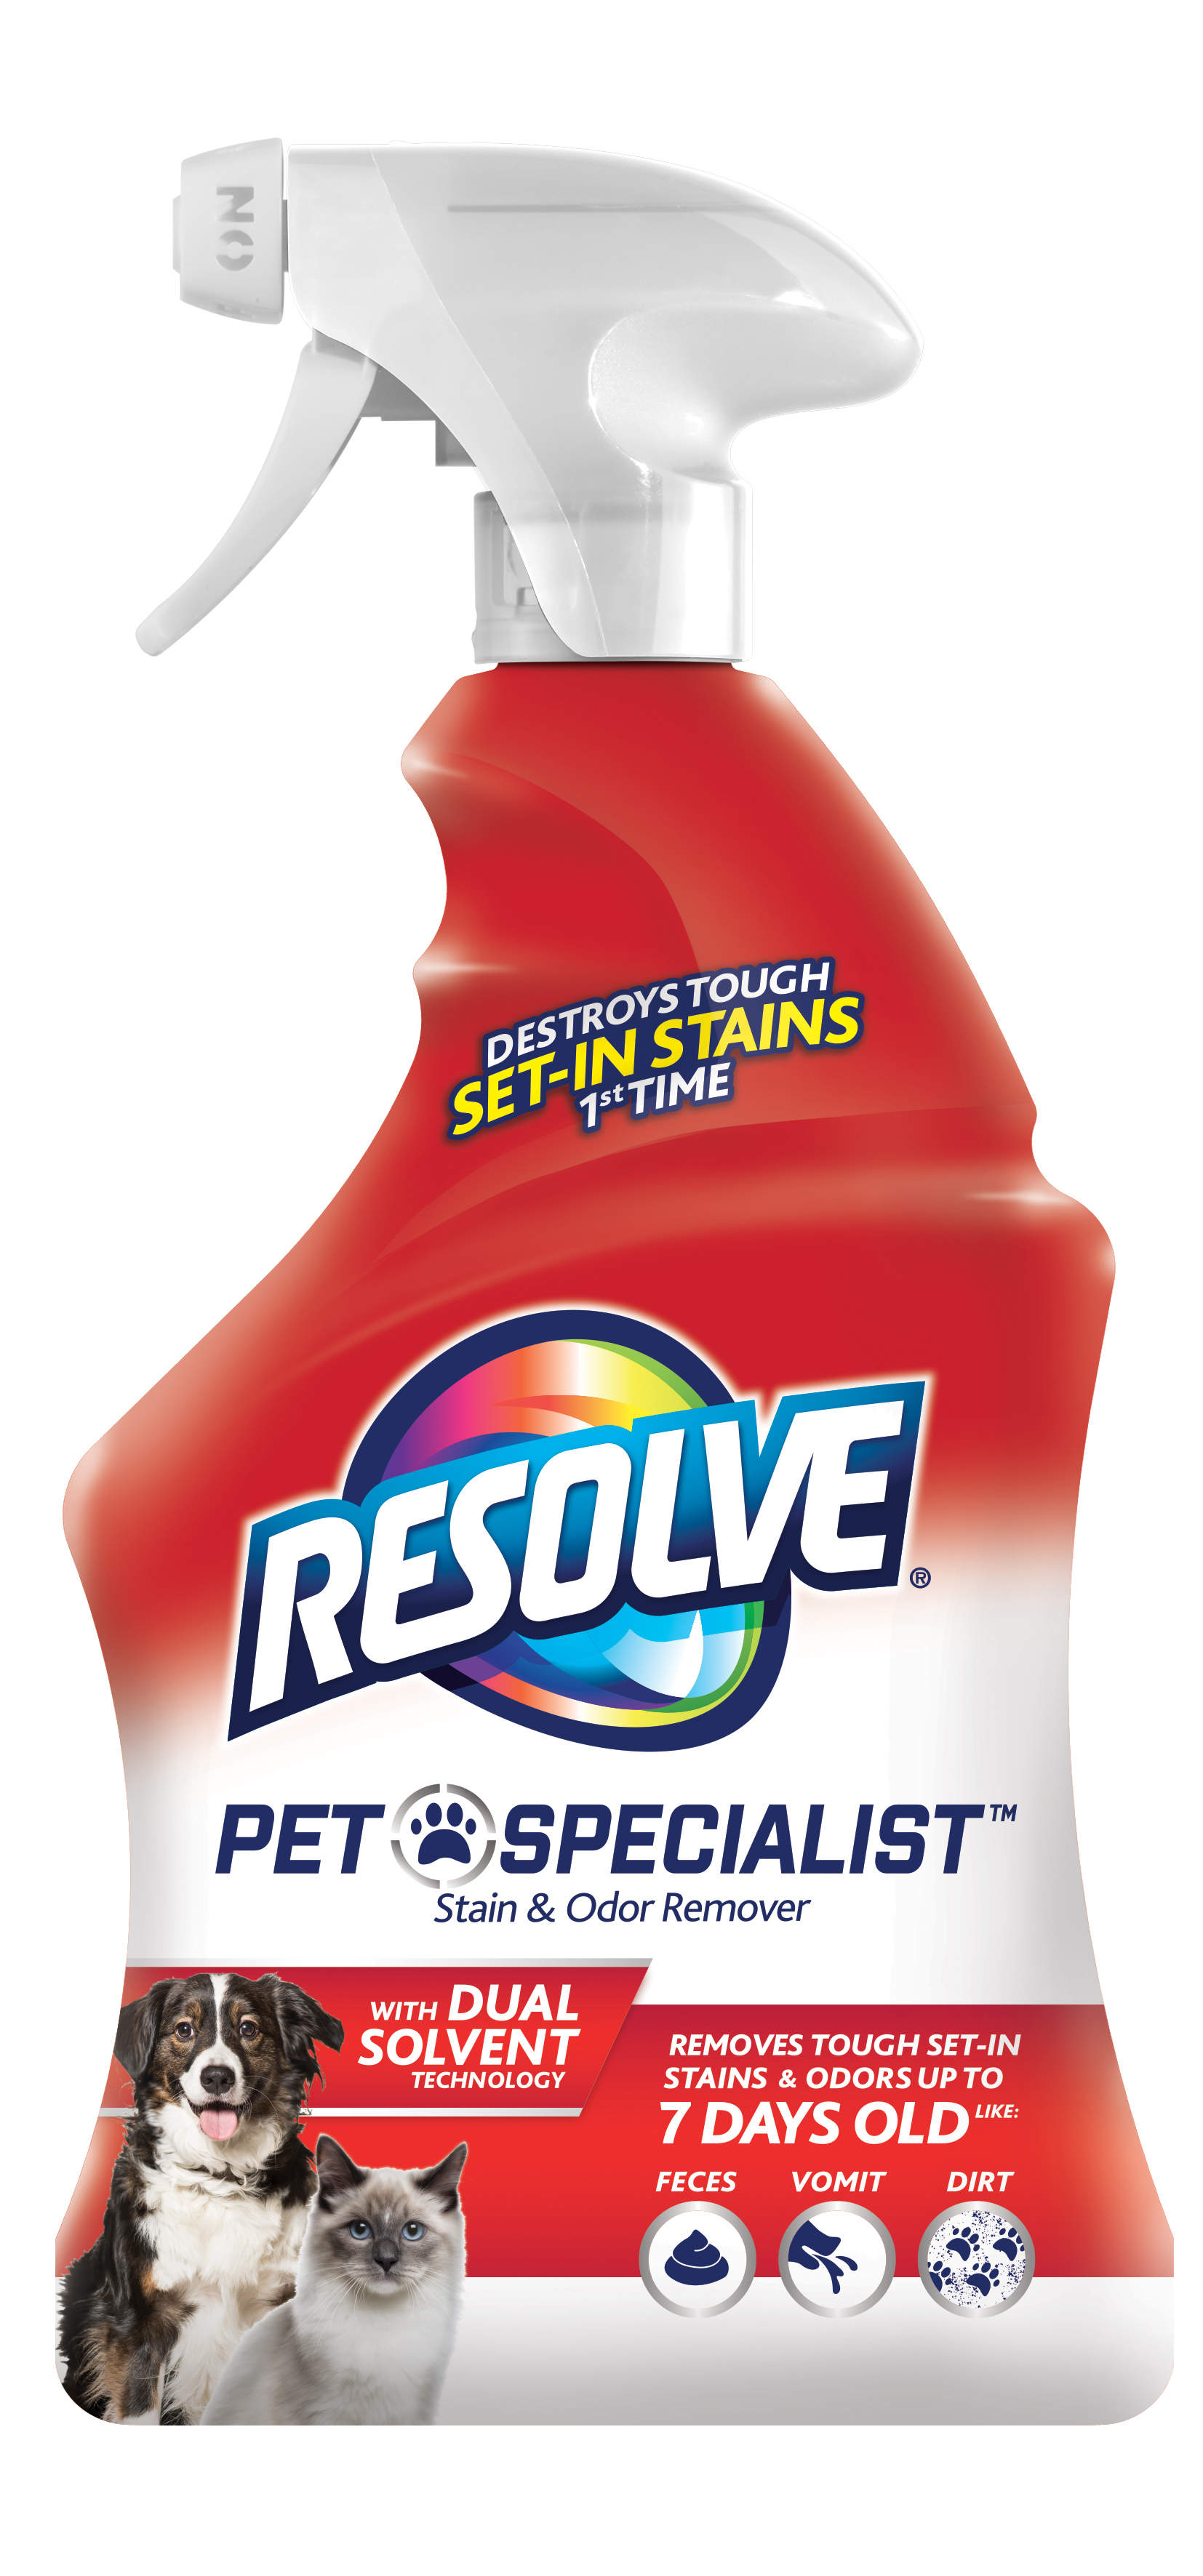 Resolve 22 Fl Oz Multi Fabric Cleaner And Upholstery Stain Remover  Multi-Purpose